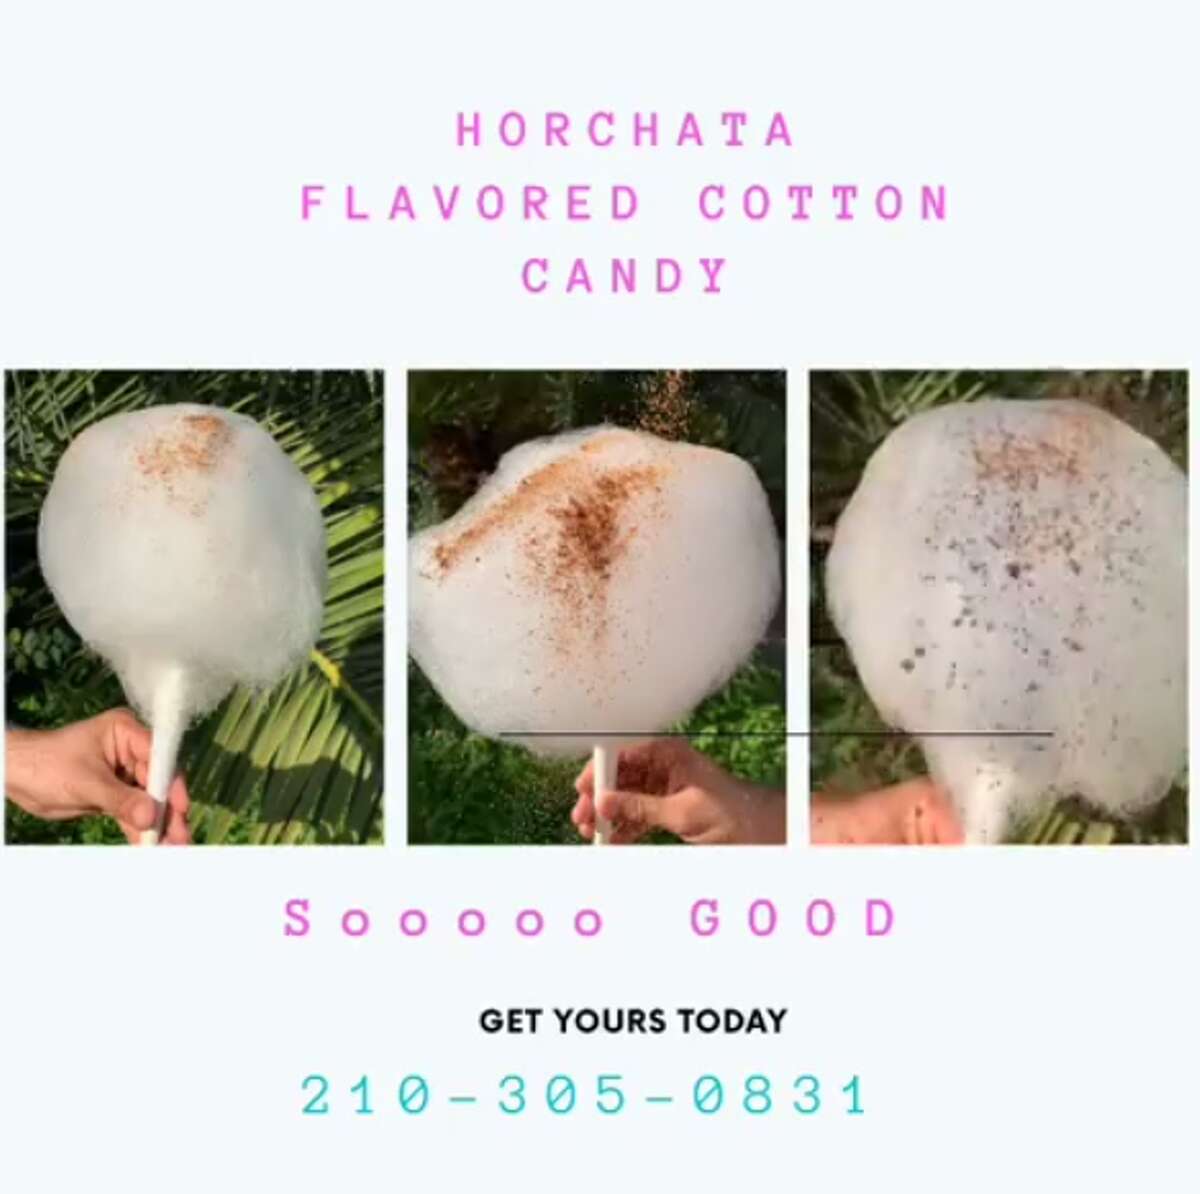 Cloud 9 Cotton Candy Catering offers the sugary confection with what owner Veronica Gallegos Johannesen calls "Latin flavors," such as chamoy, watermelon or pineapple with Tajín, Hot Cheetos, tamarindo and others such as cinnamon, Pop Rocks or just sprinkles.